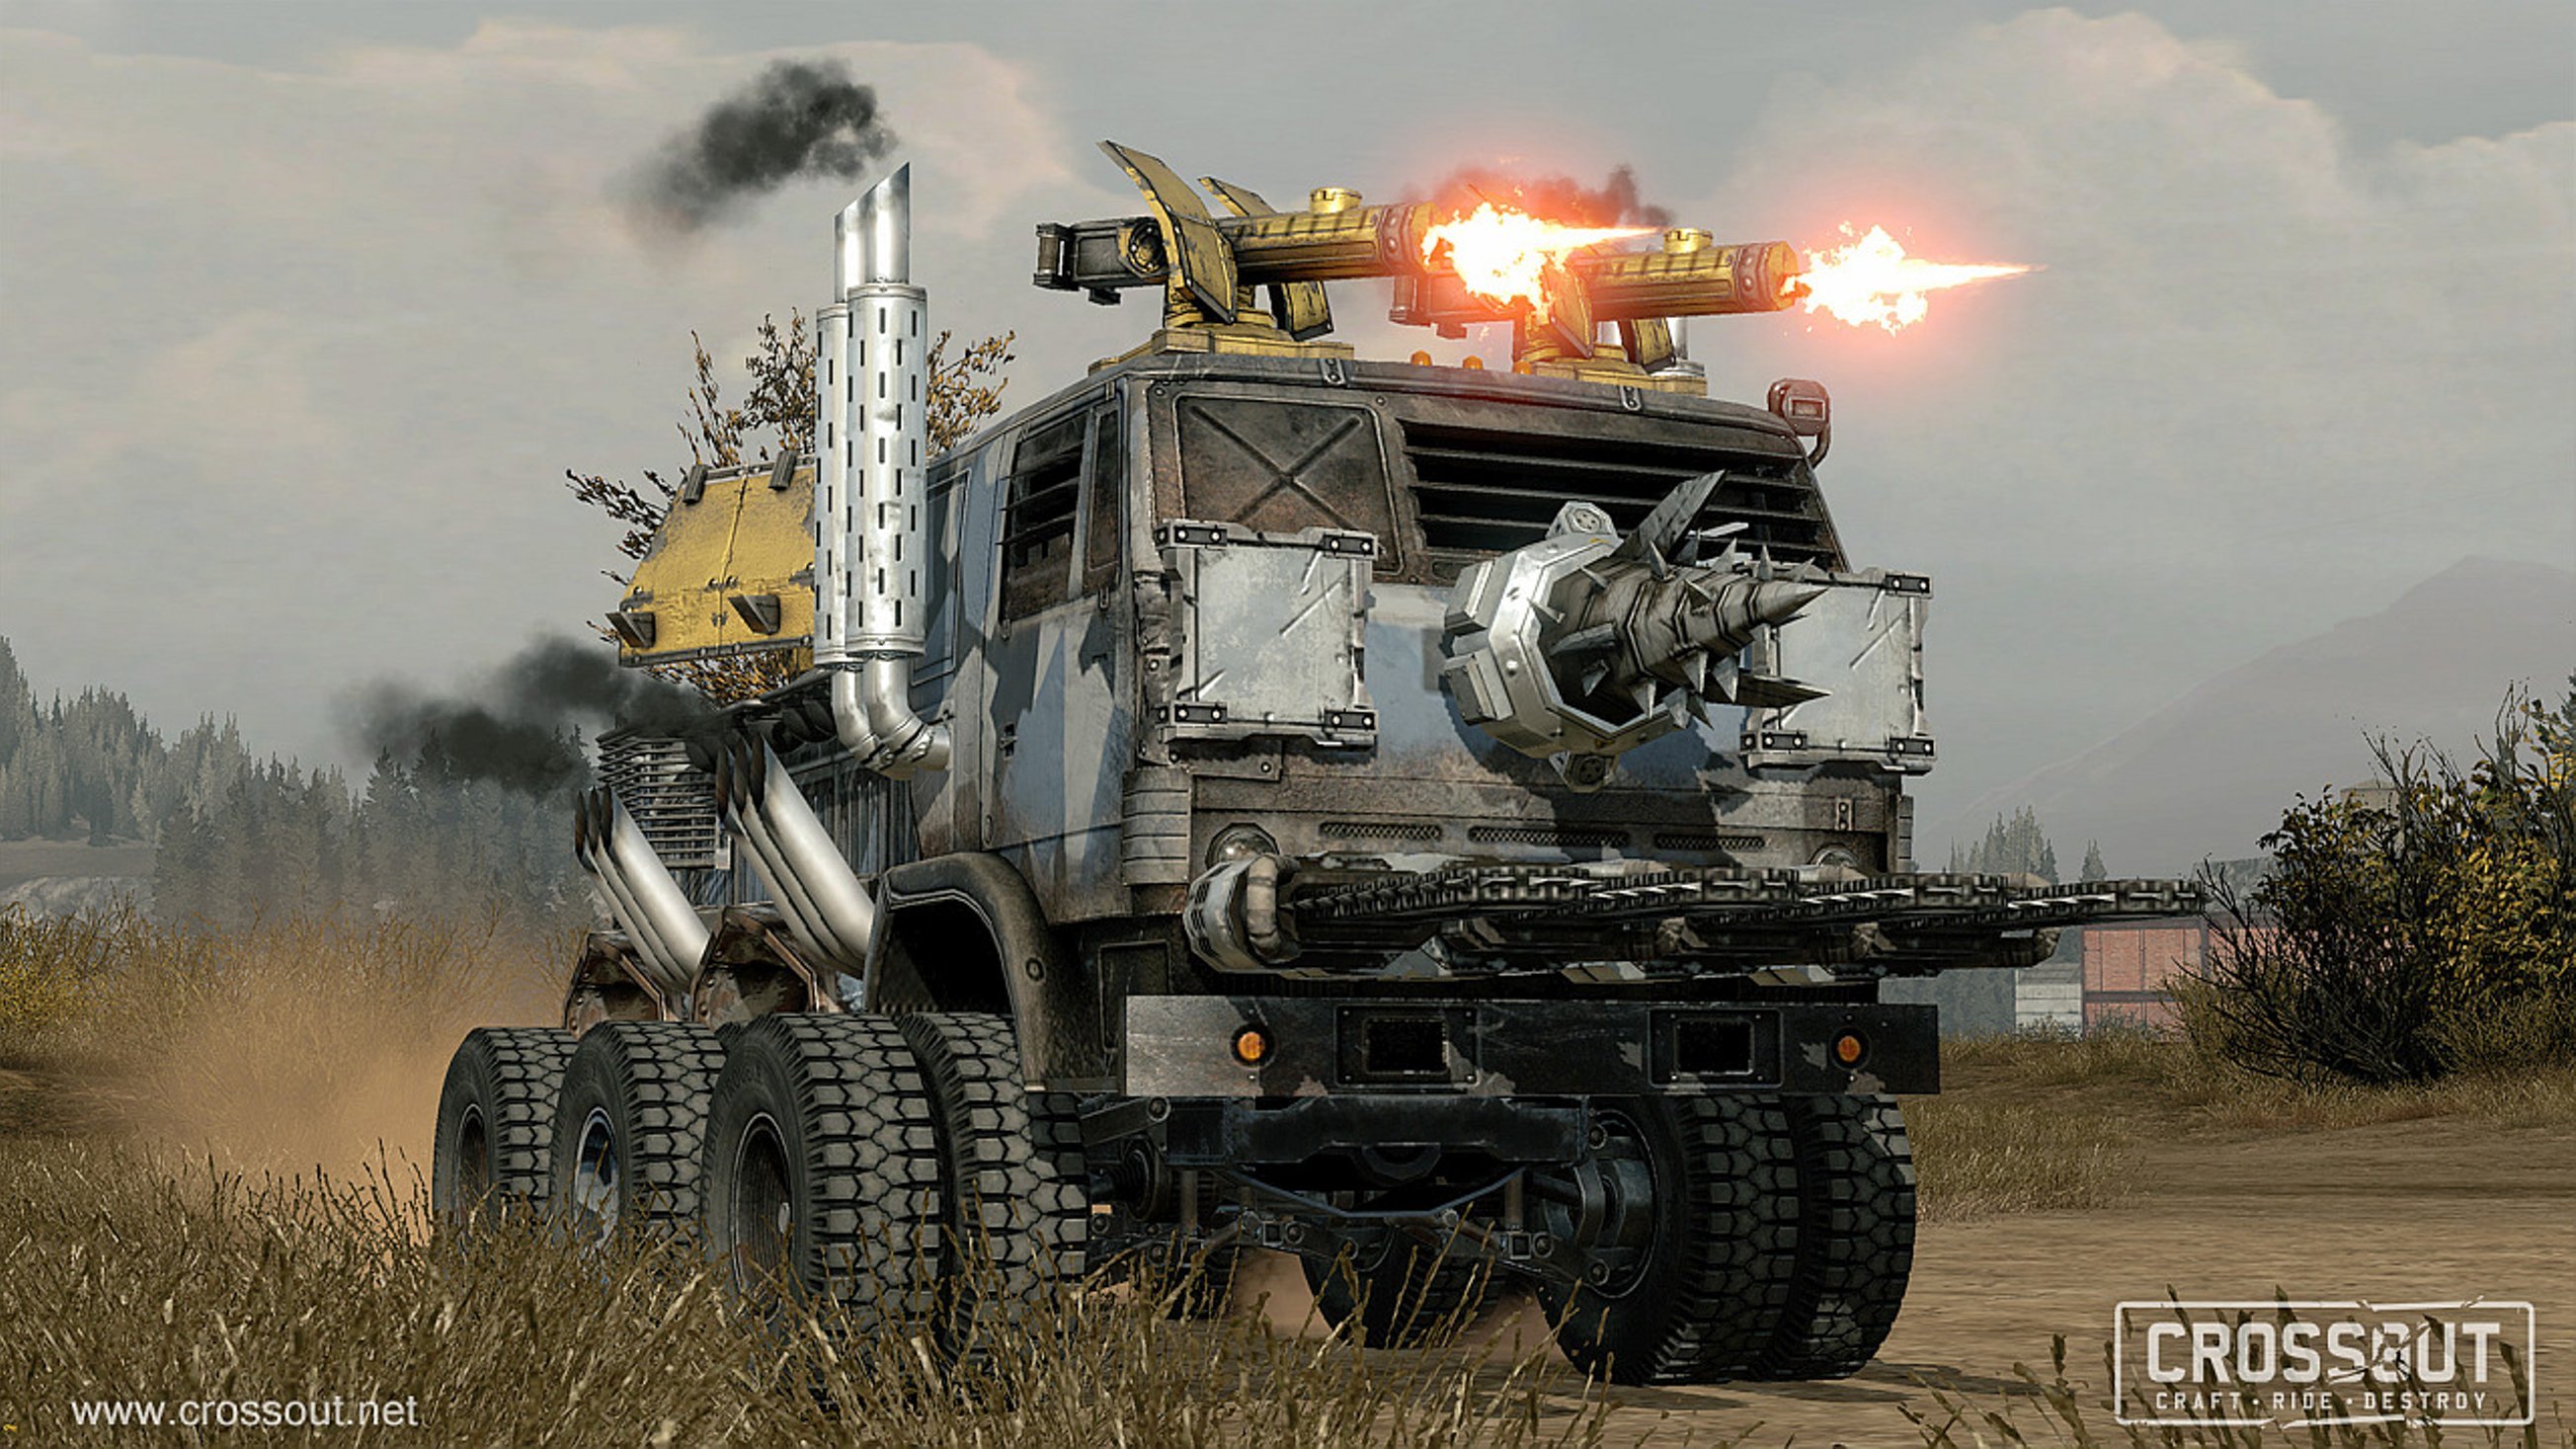 Cross out the excess. КАМАЗ кроссаут. Игра кроссаут Crossout кроссаут. МАЗ кроссаут. Кроссаут лук.